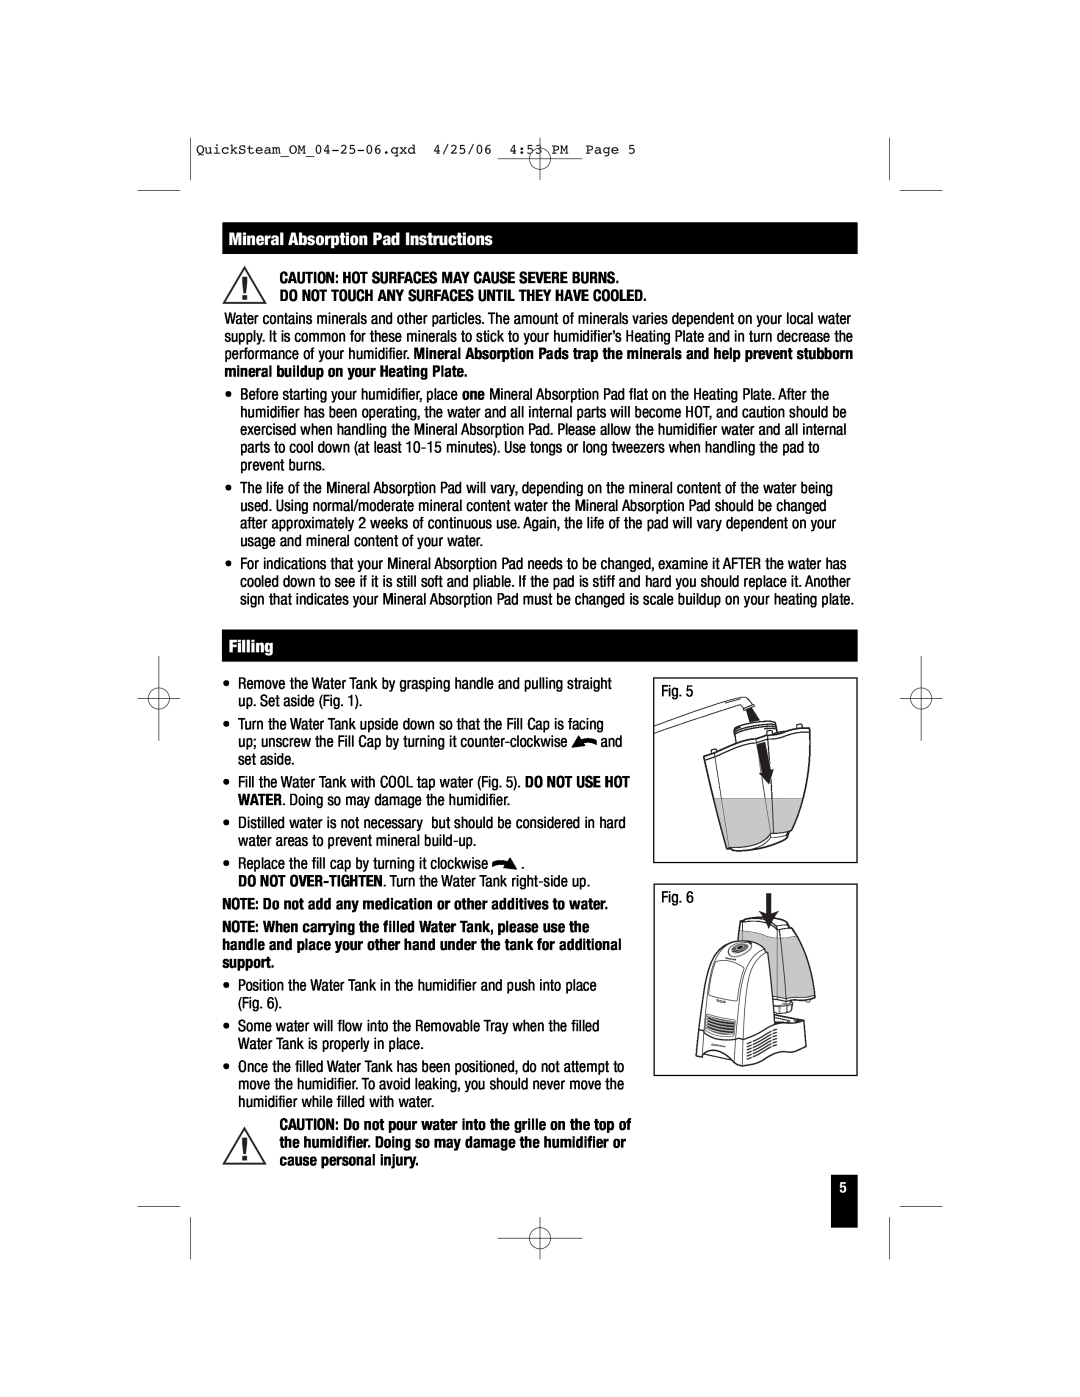 Honeywell HWM-335, HWM-450 Mineral Absorption Pad Instructions, Filling, Caution Hot Surfaces May Cause Severe Burns 